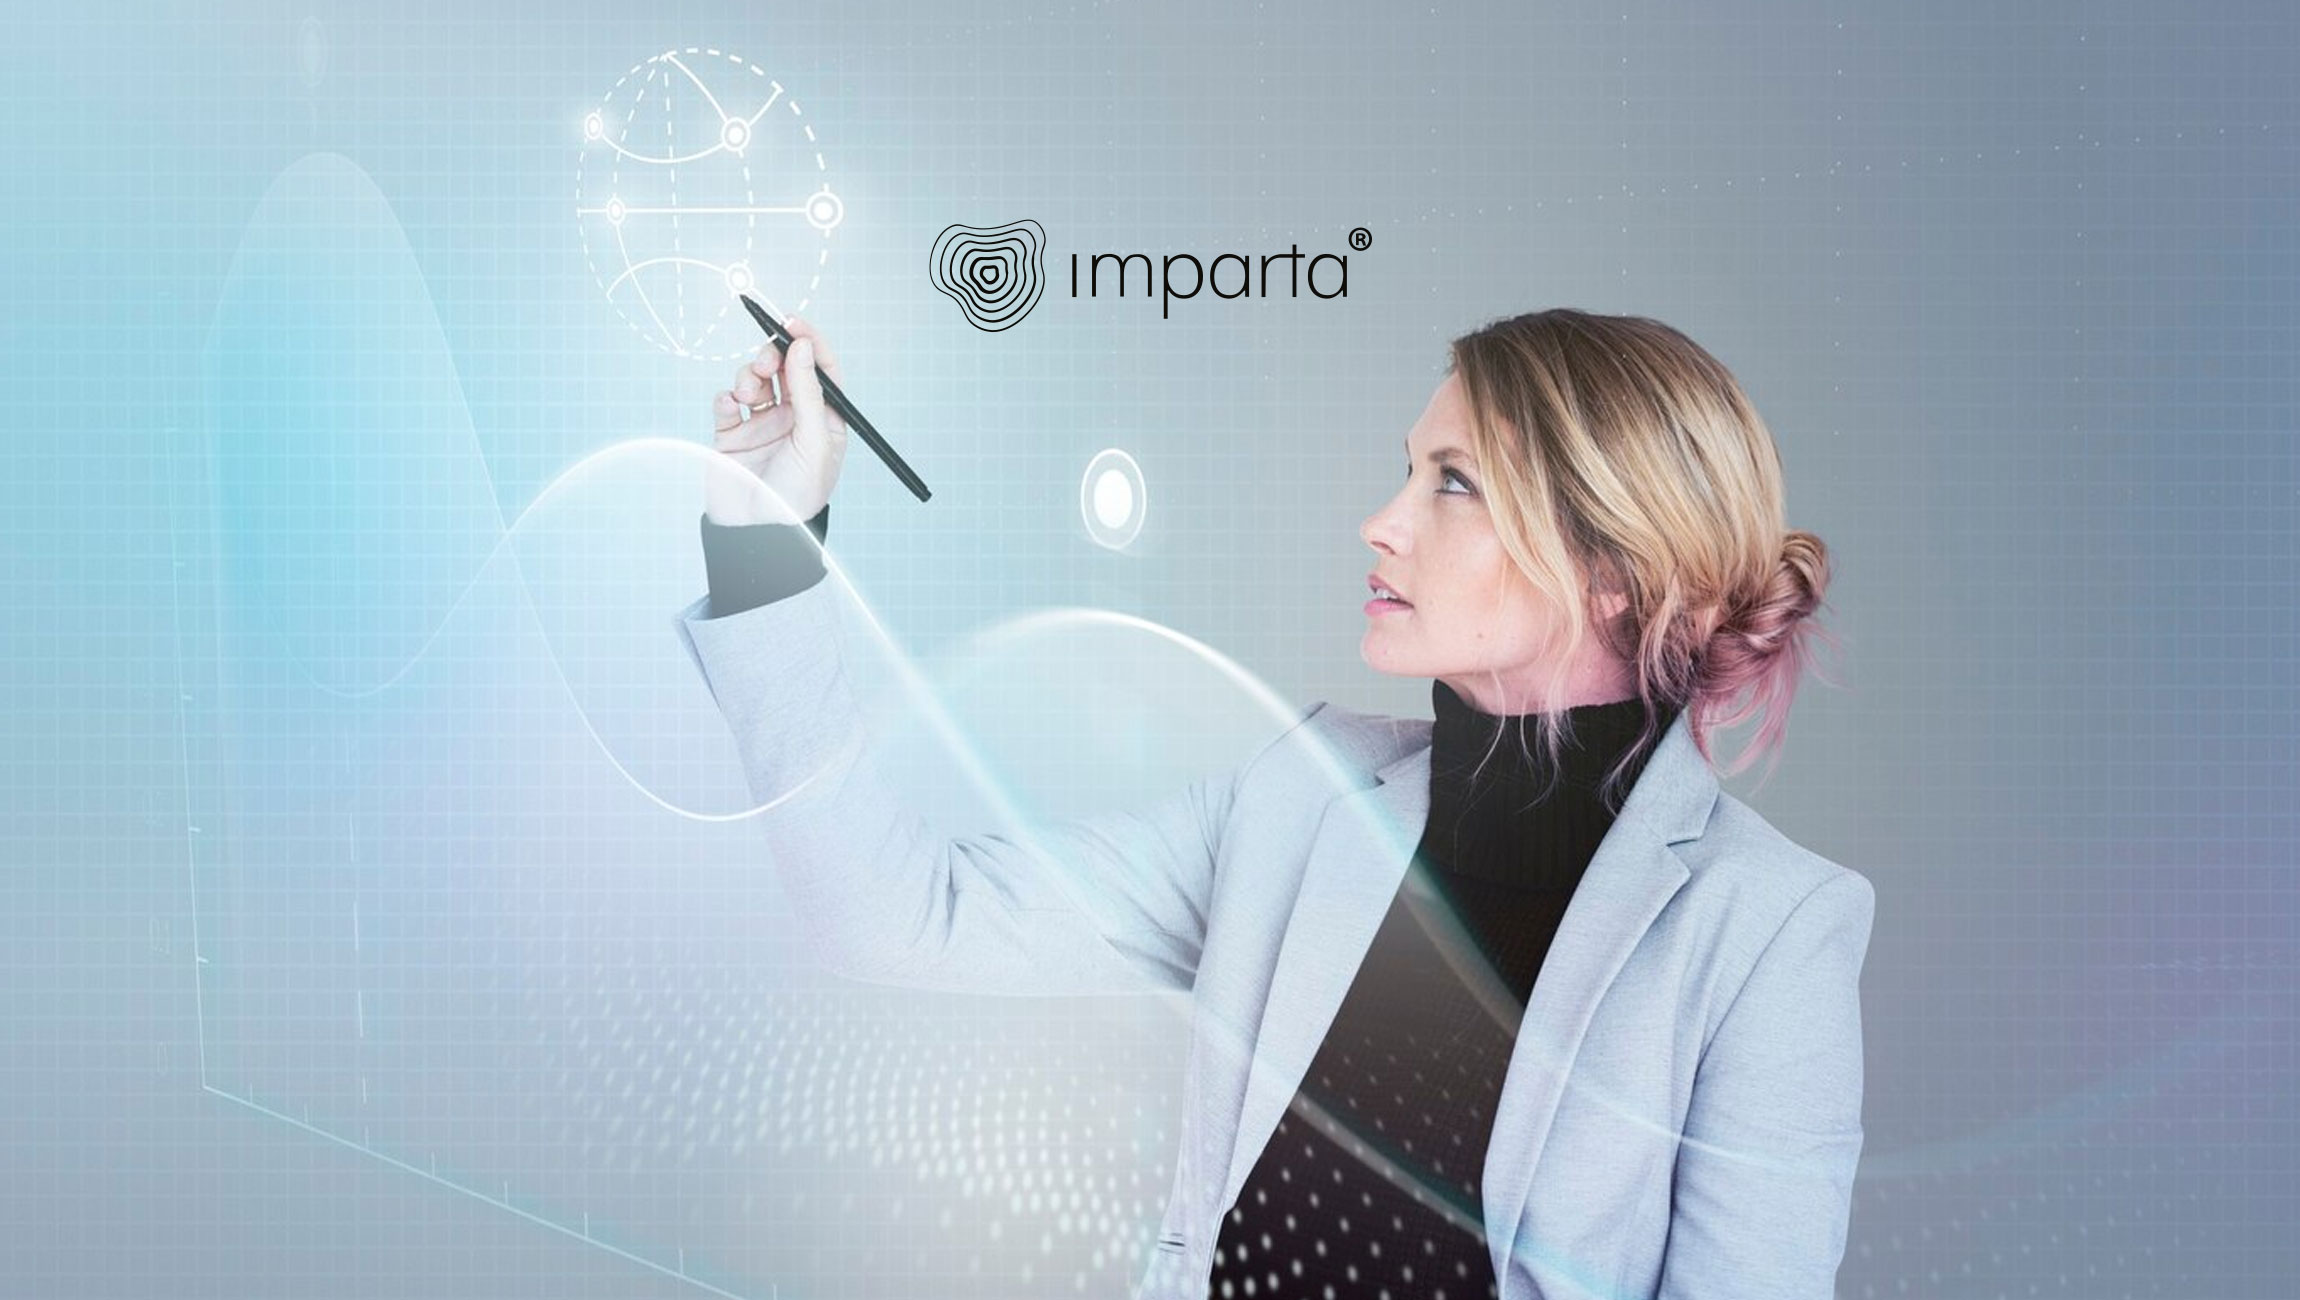 Imparta Launches Worlds First Sales Methodology-Aware AI